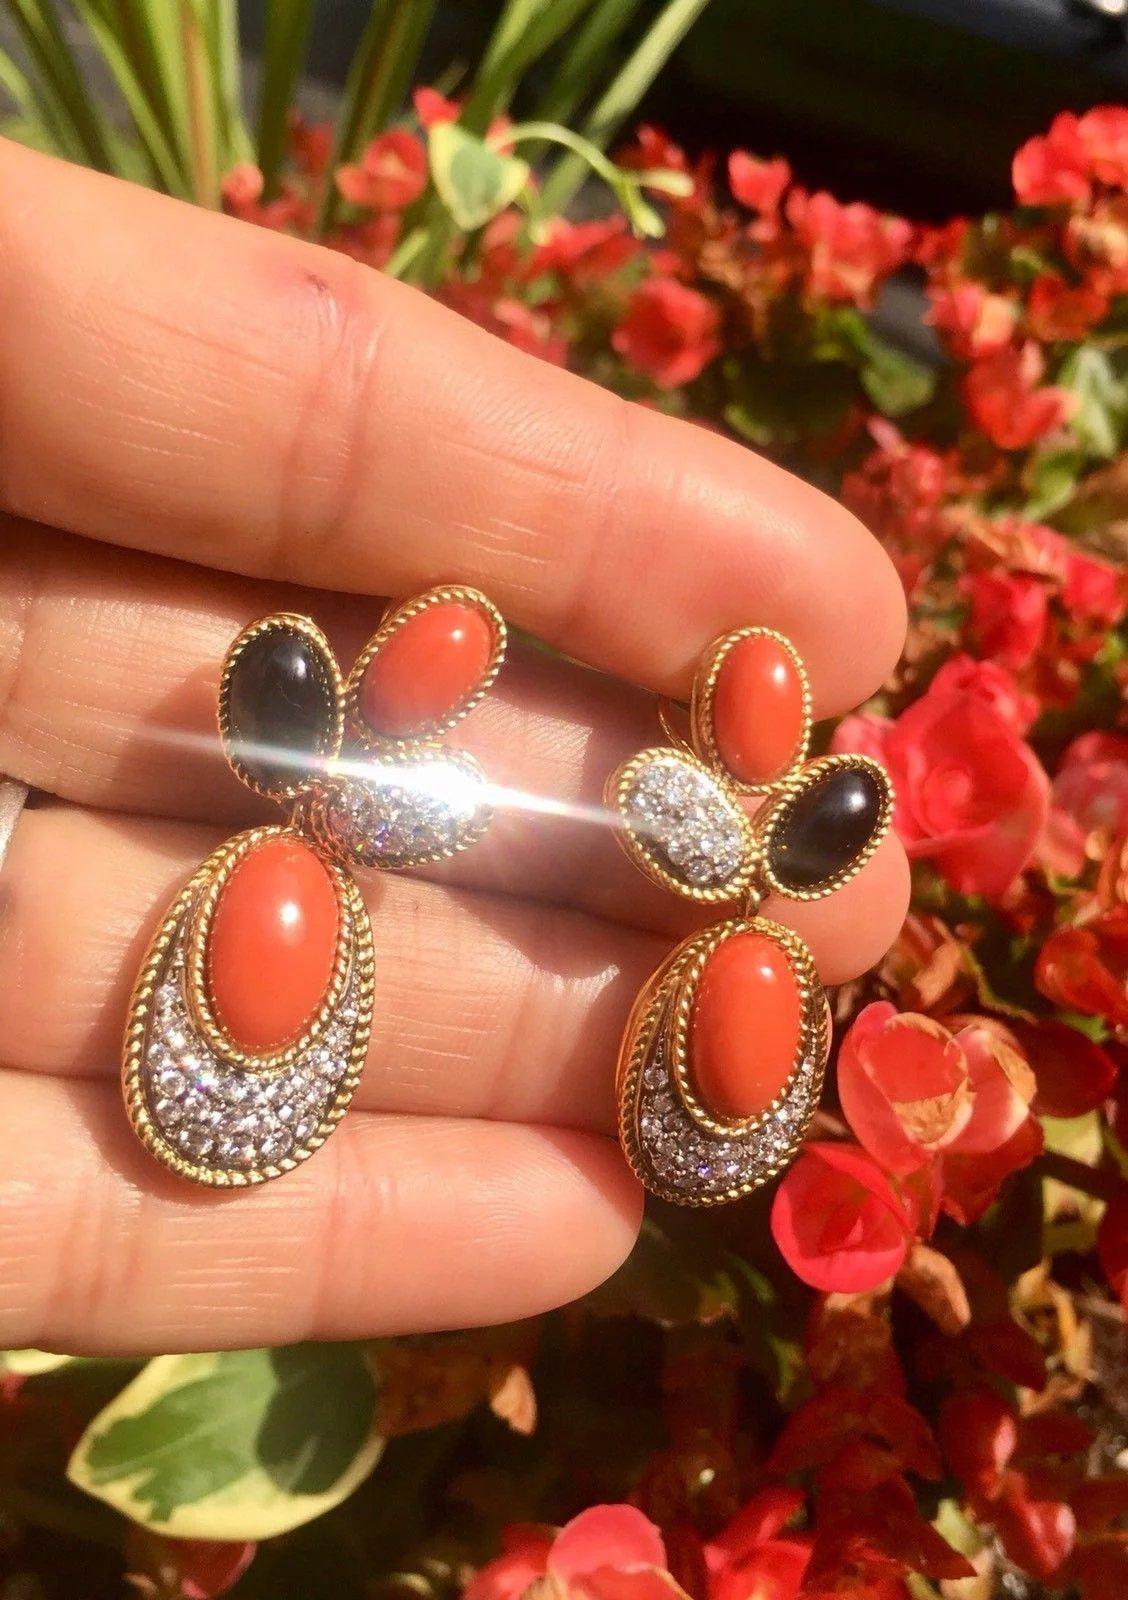 These stunning estate high end dangle earrings are set in 18 karat gold (tested) with lovely medium orange coral and black onyx gemstone cabochons.

Earrings are also set with 74 round diamonds totaling approximately 1.50 carats of G/VS brilliant